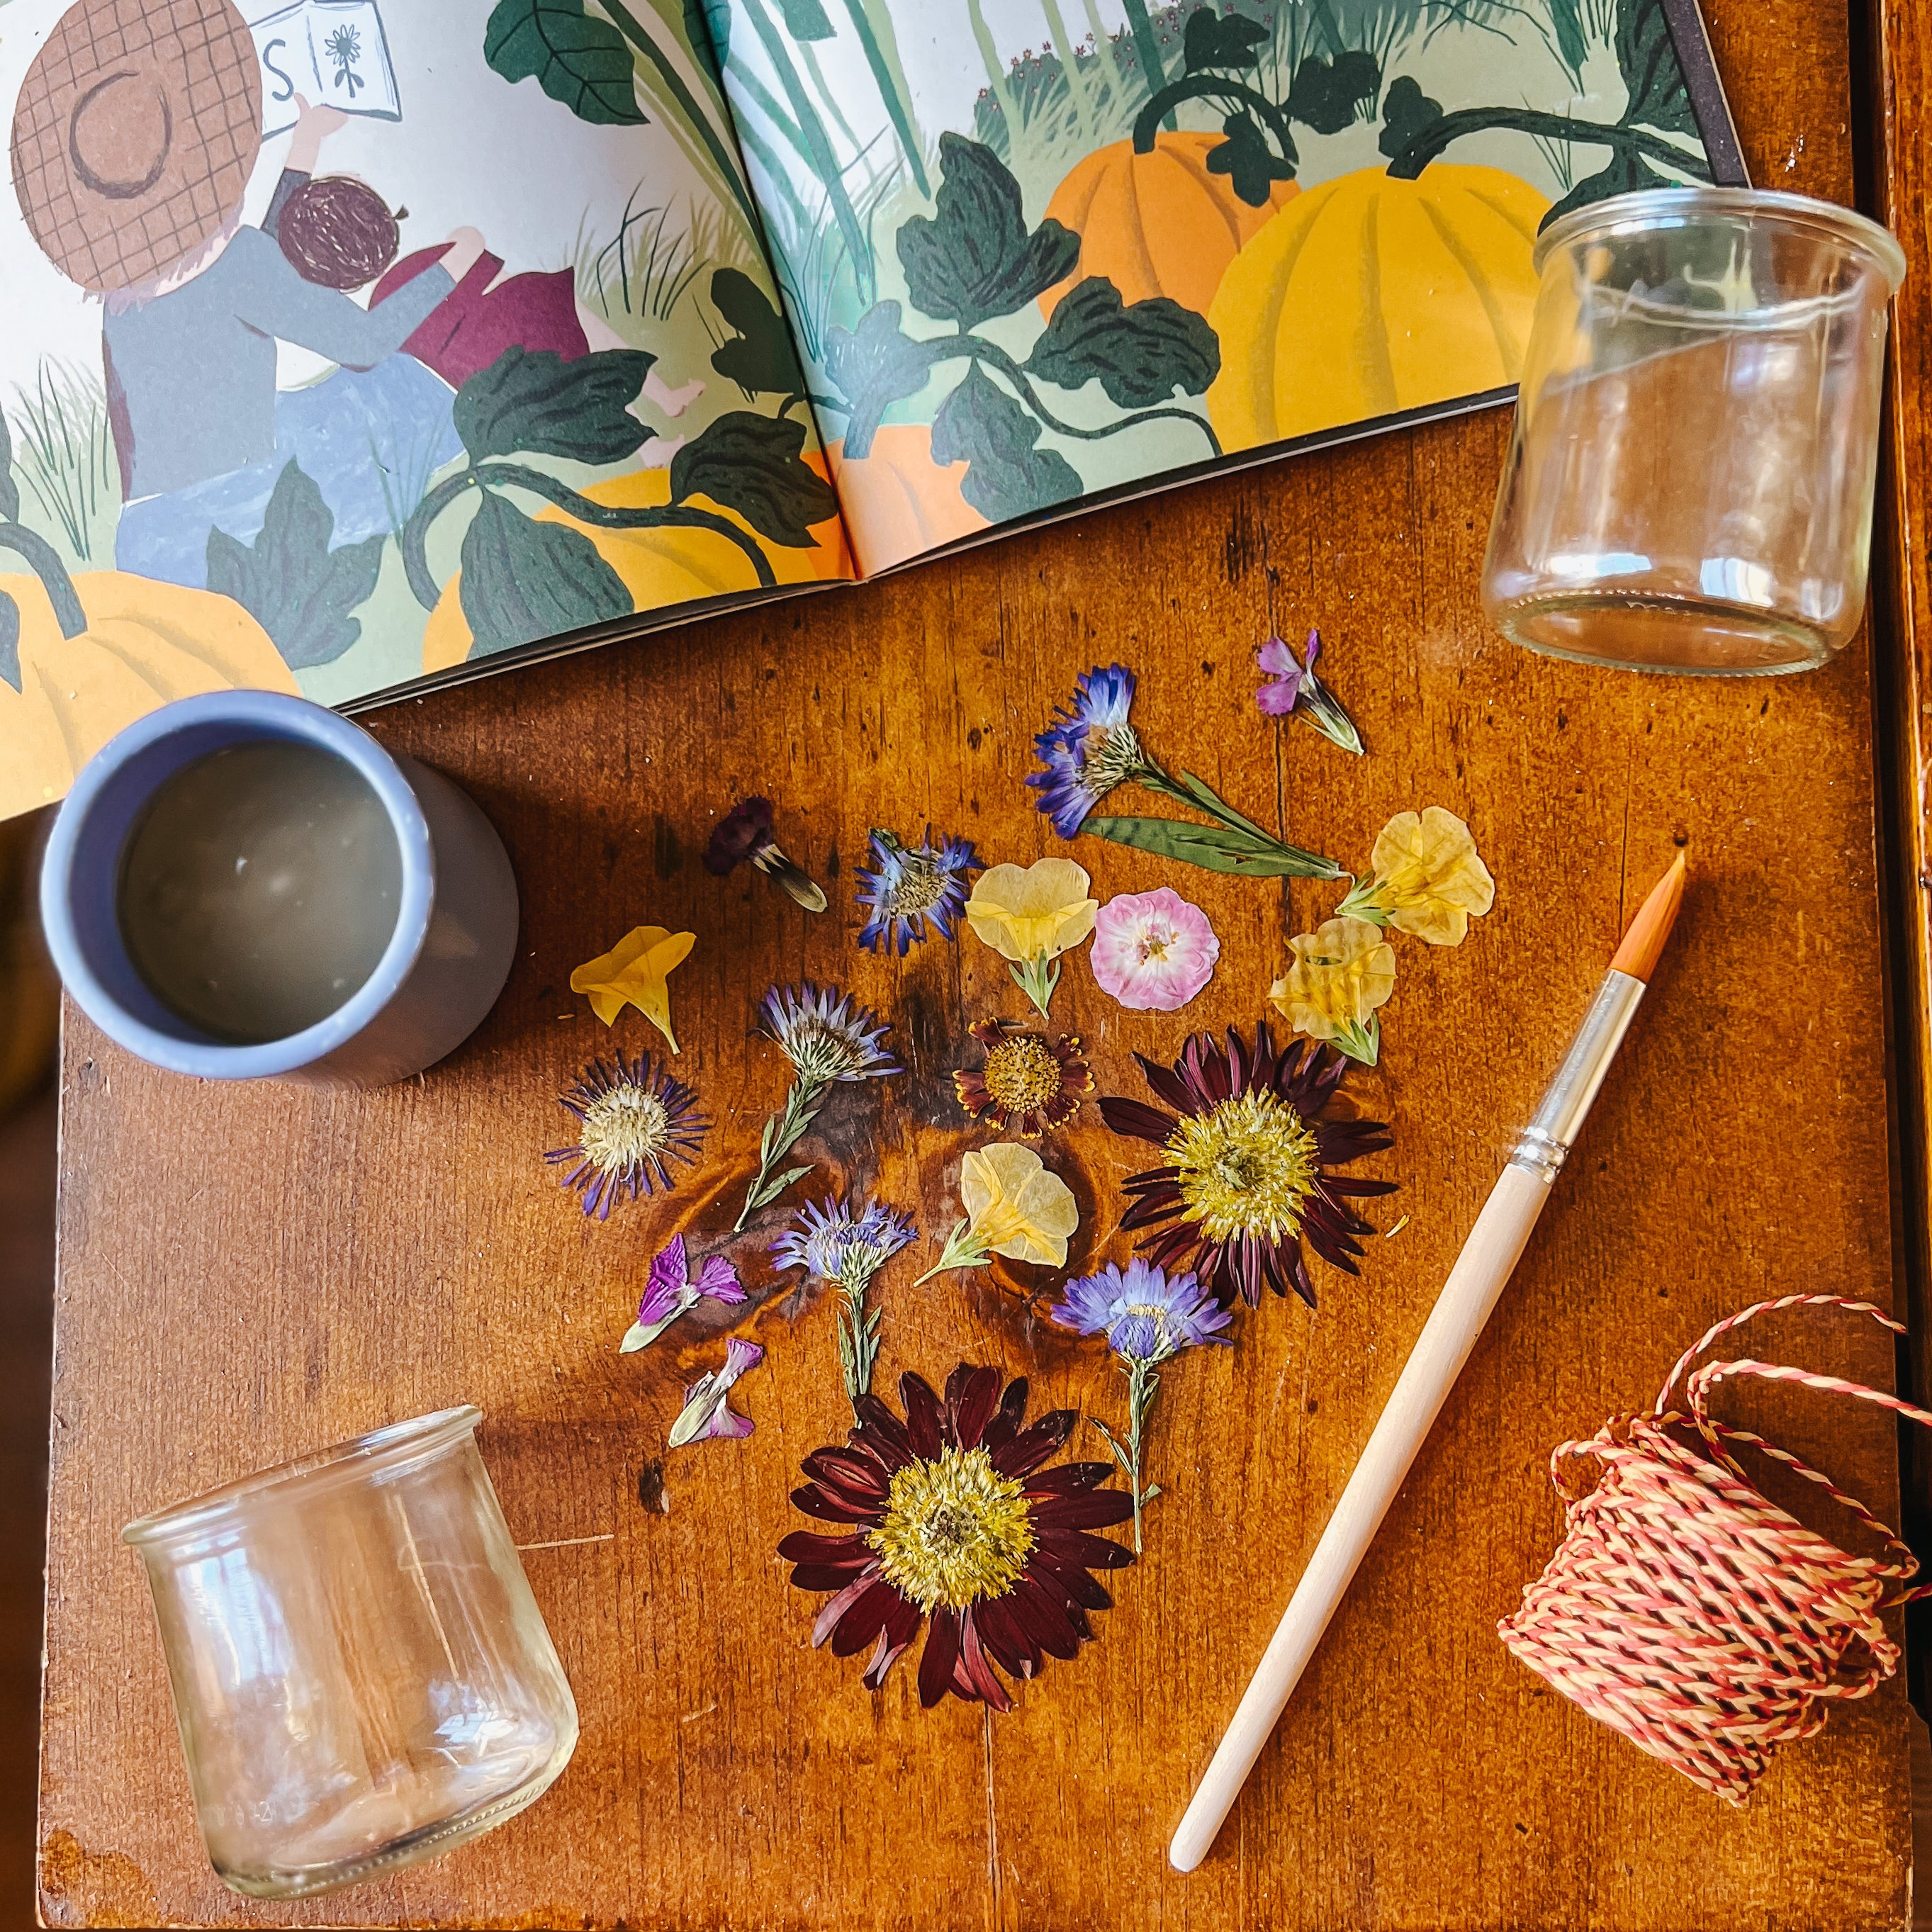 Glass jars and supplies sit on a table with pressed flowers.